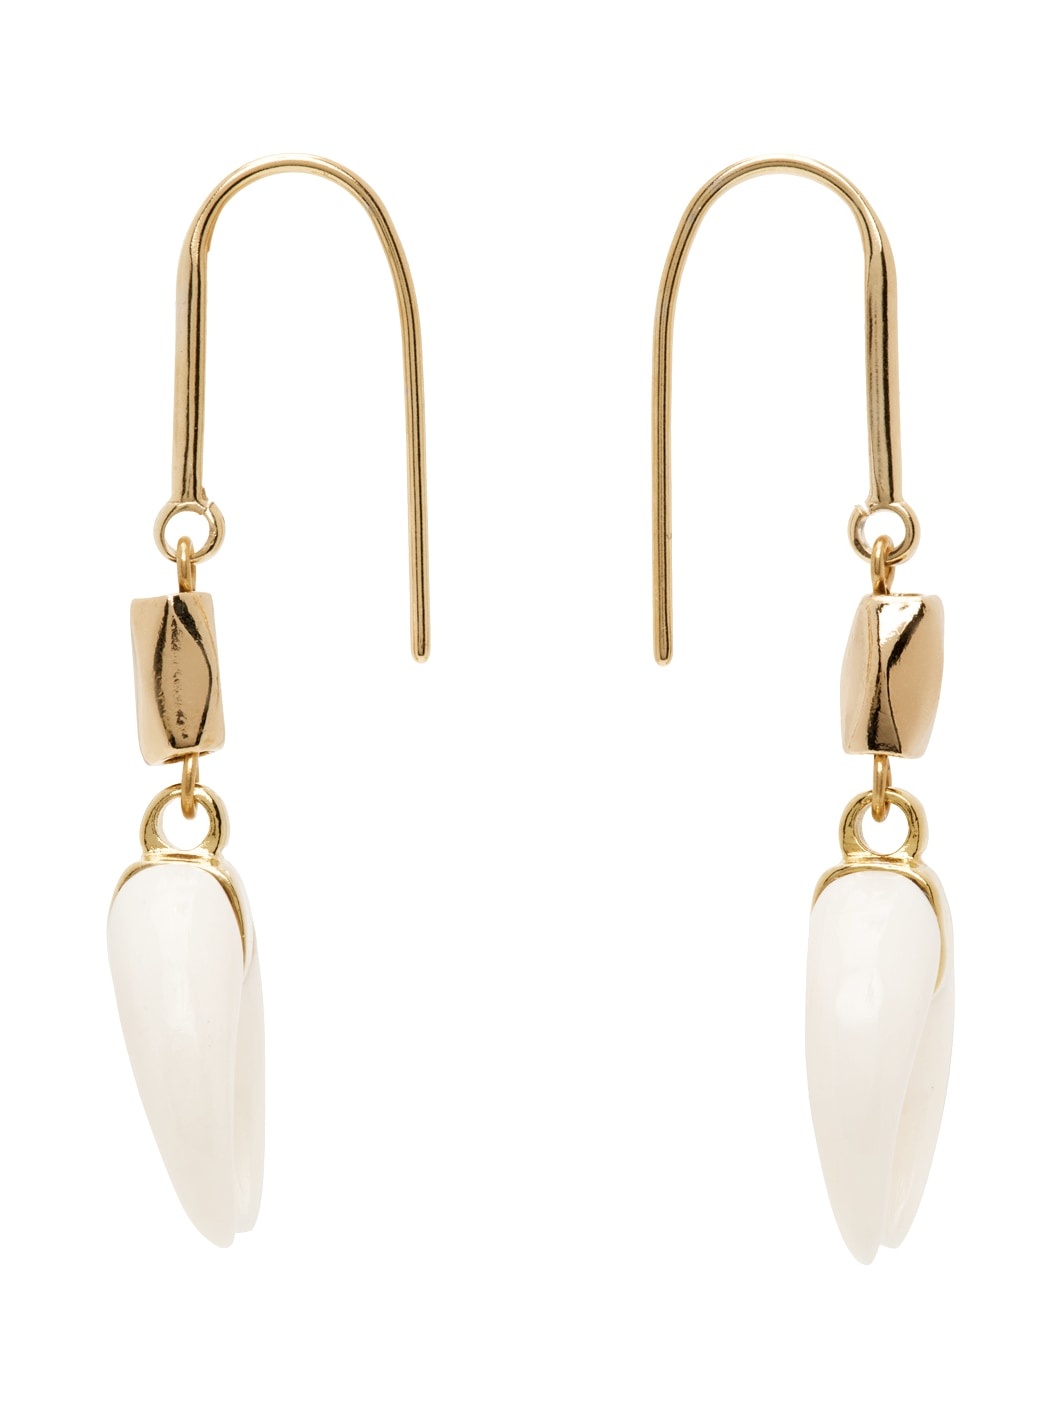 Gold & White Aimable Earrings - 1